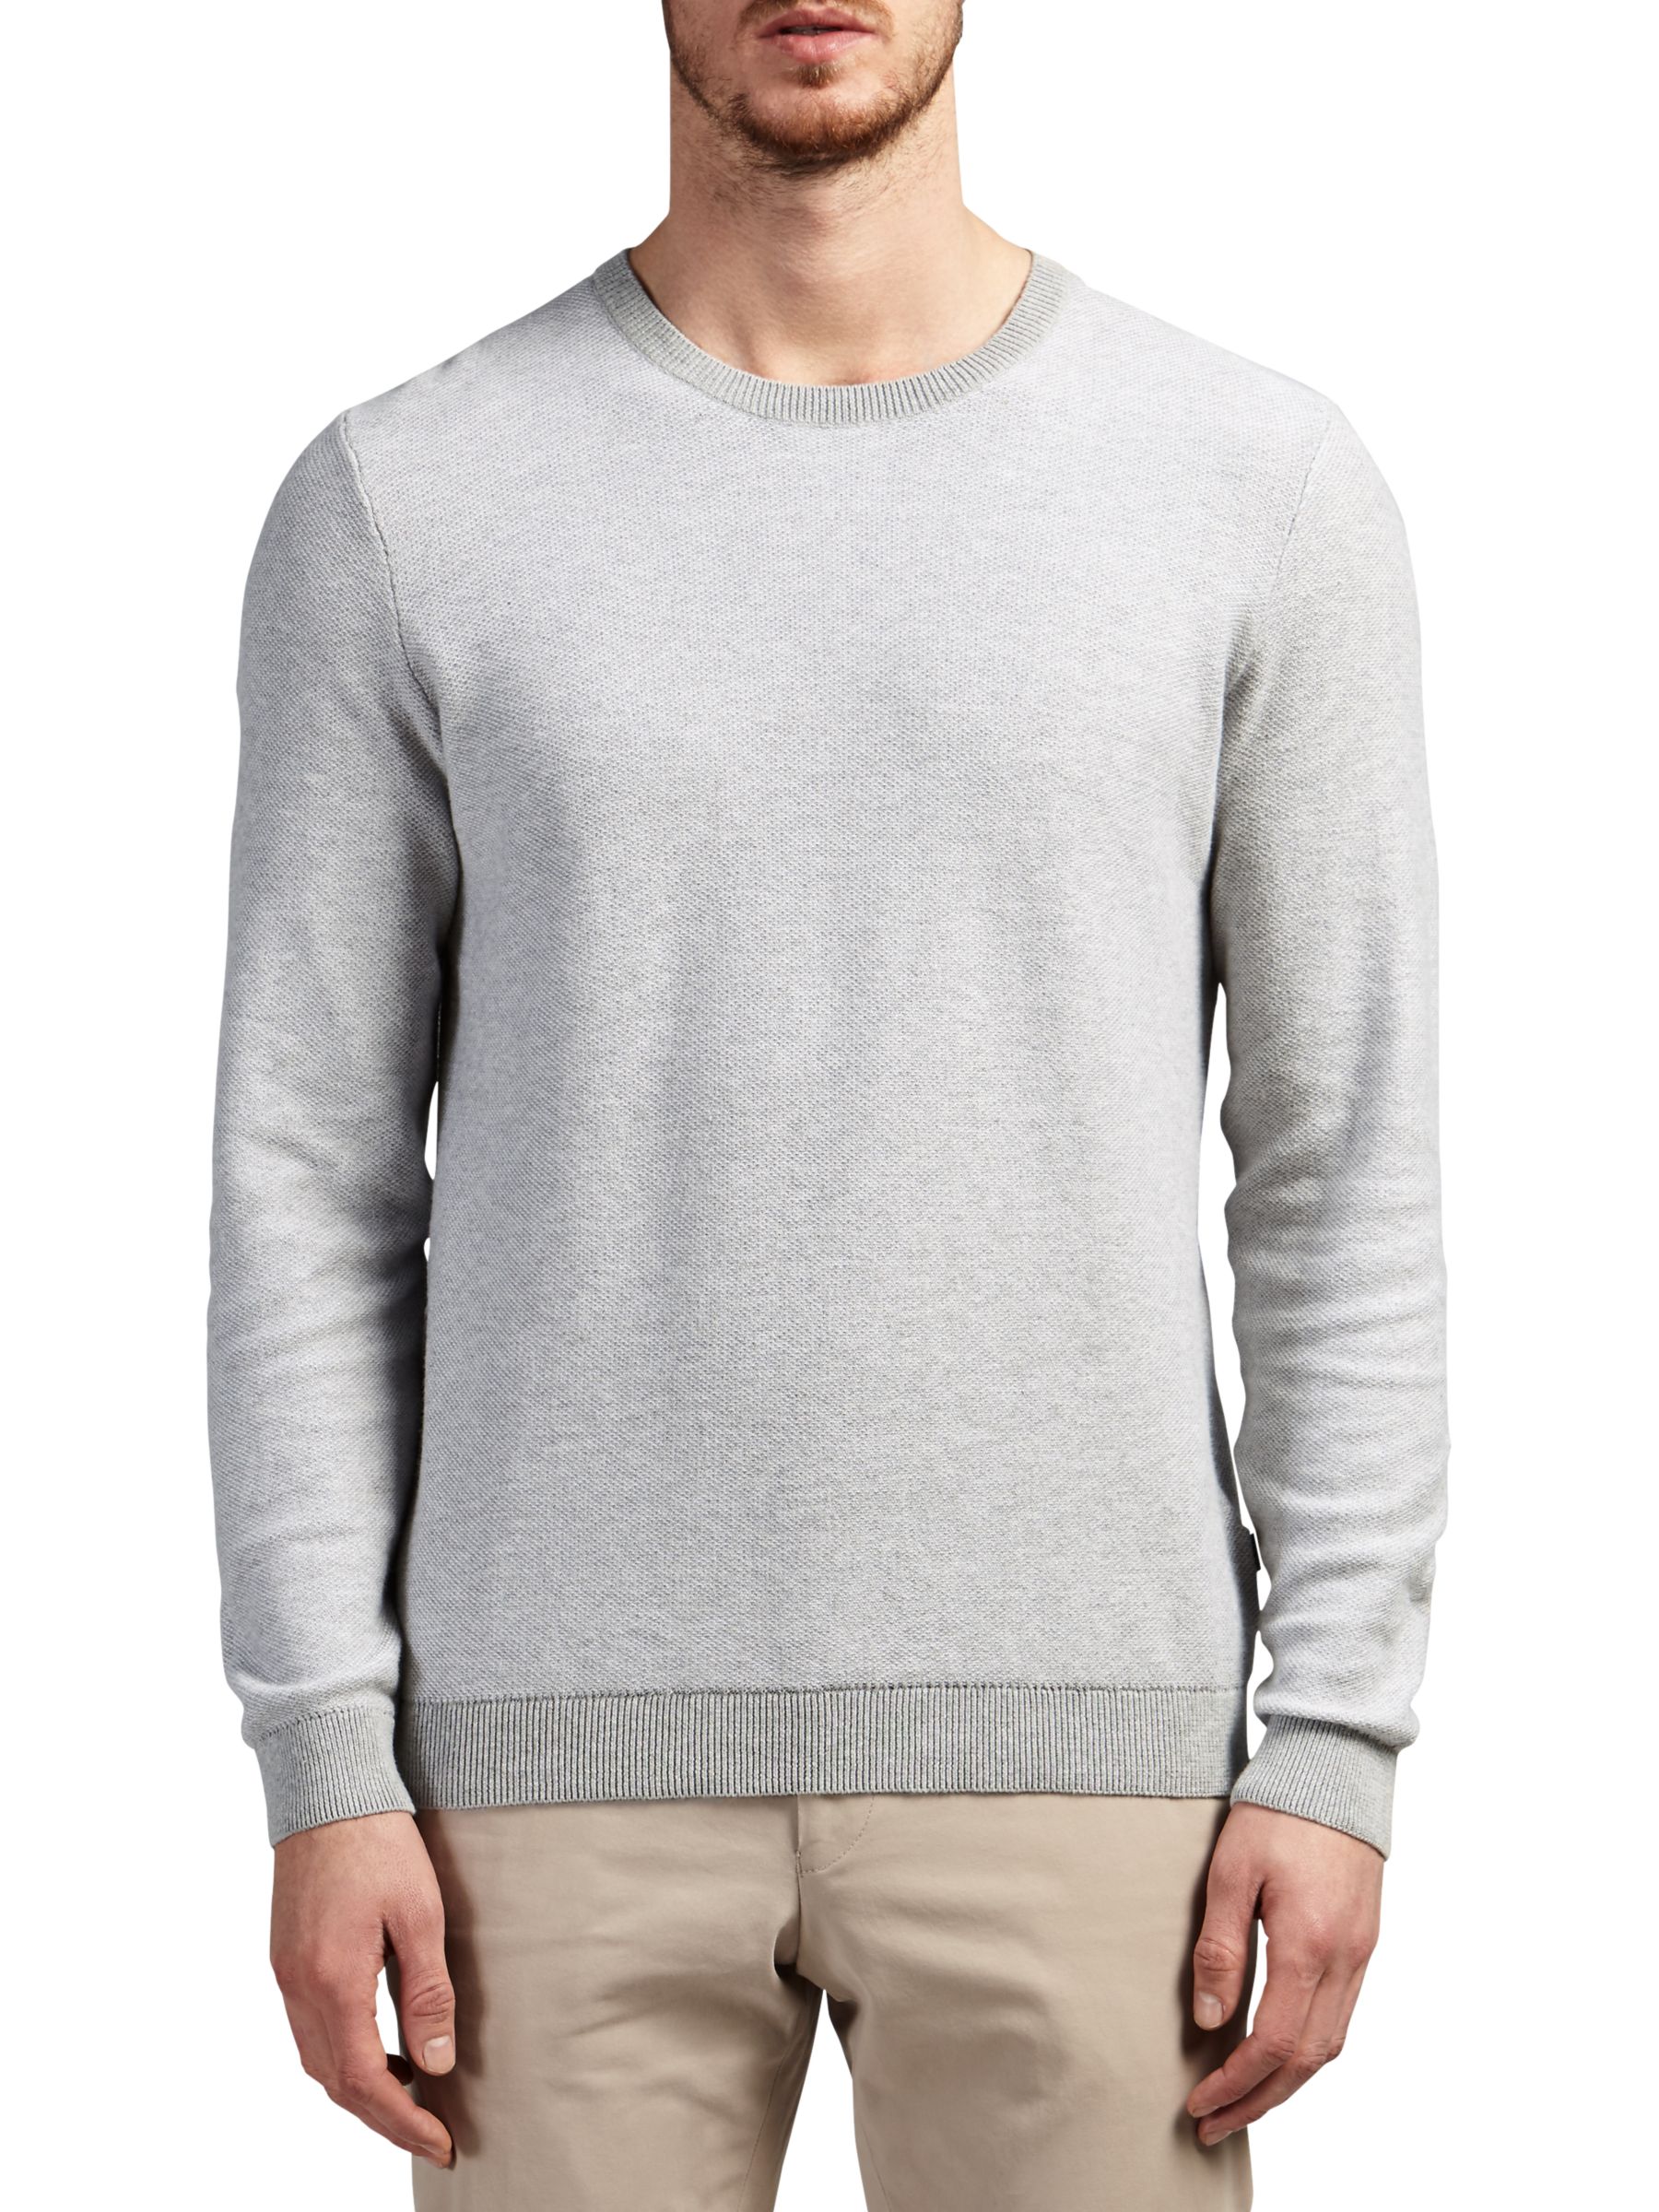 HUGO by Hugo Boss Sarmon Finely Patterned Jumper, Open Grey, M